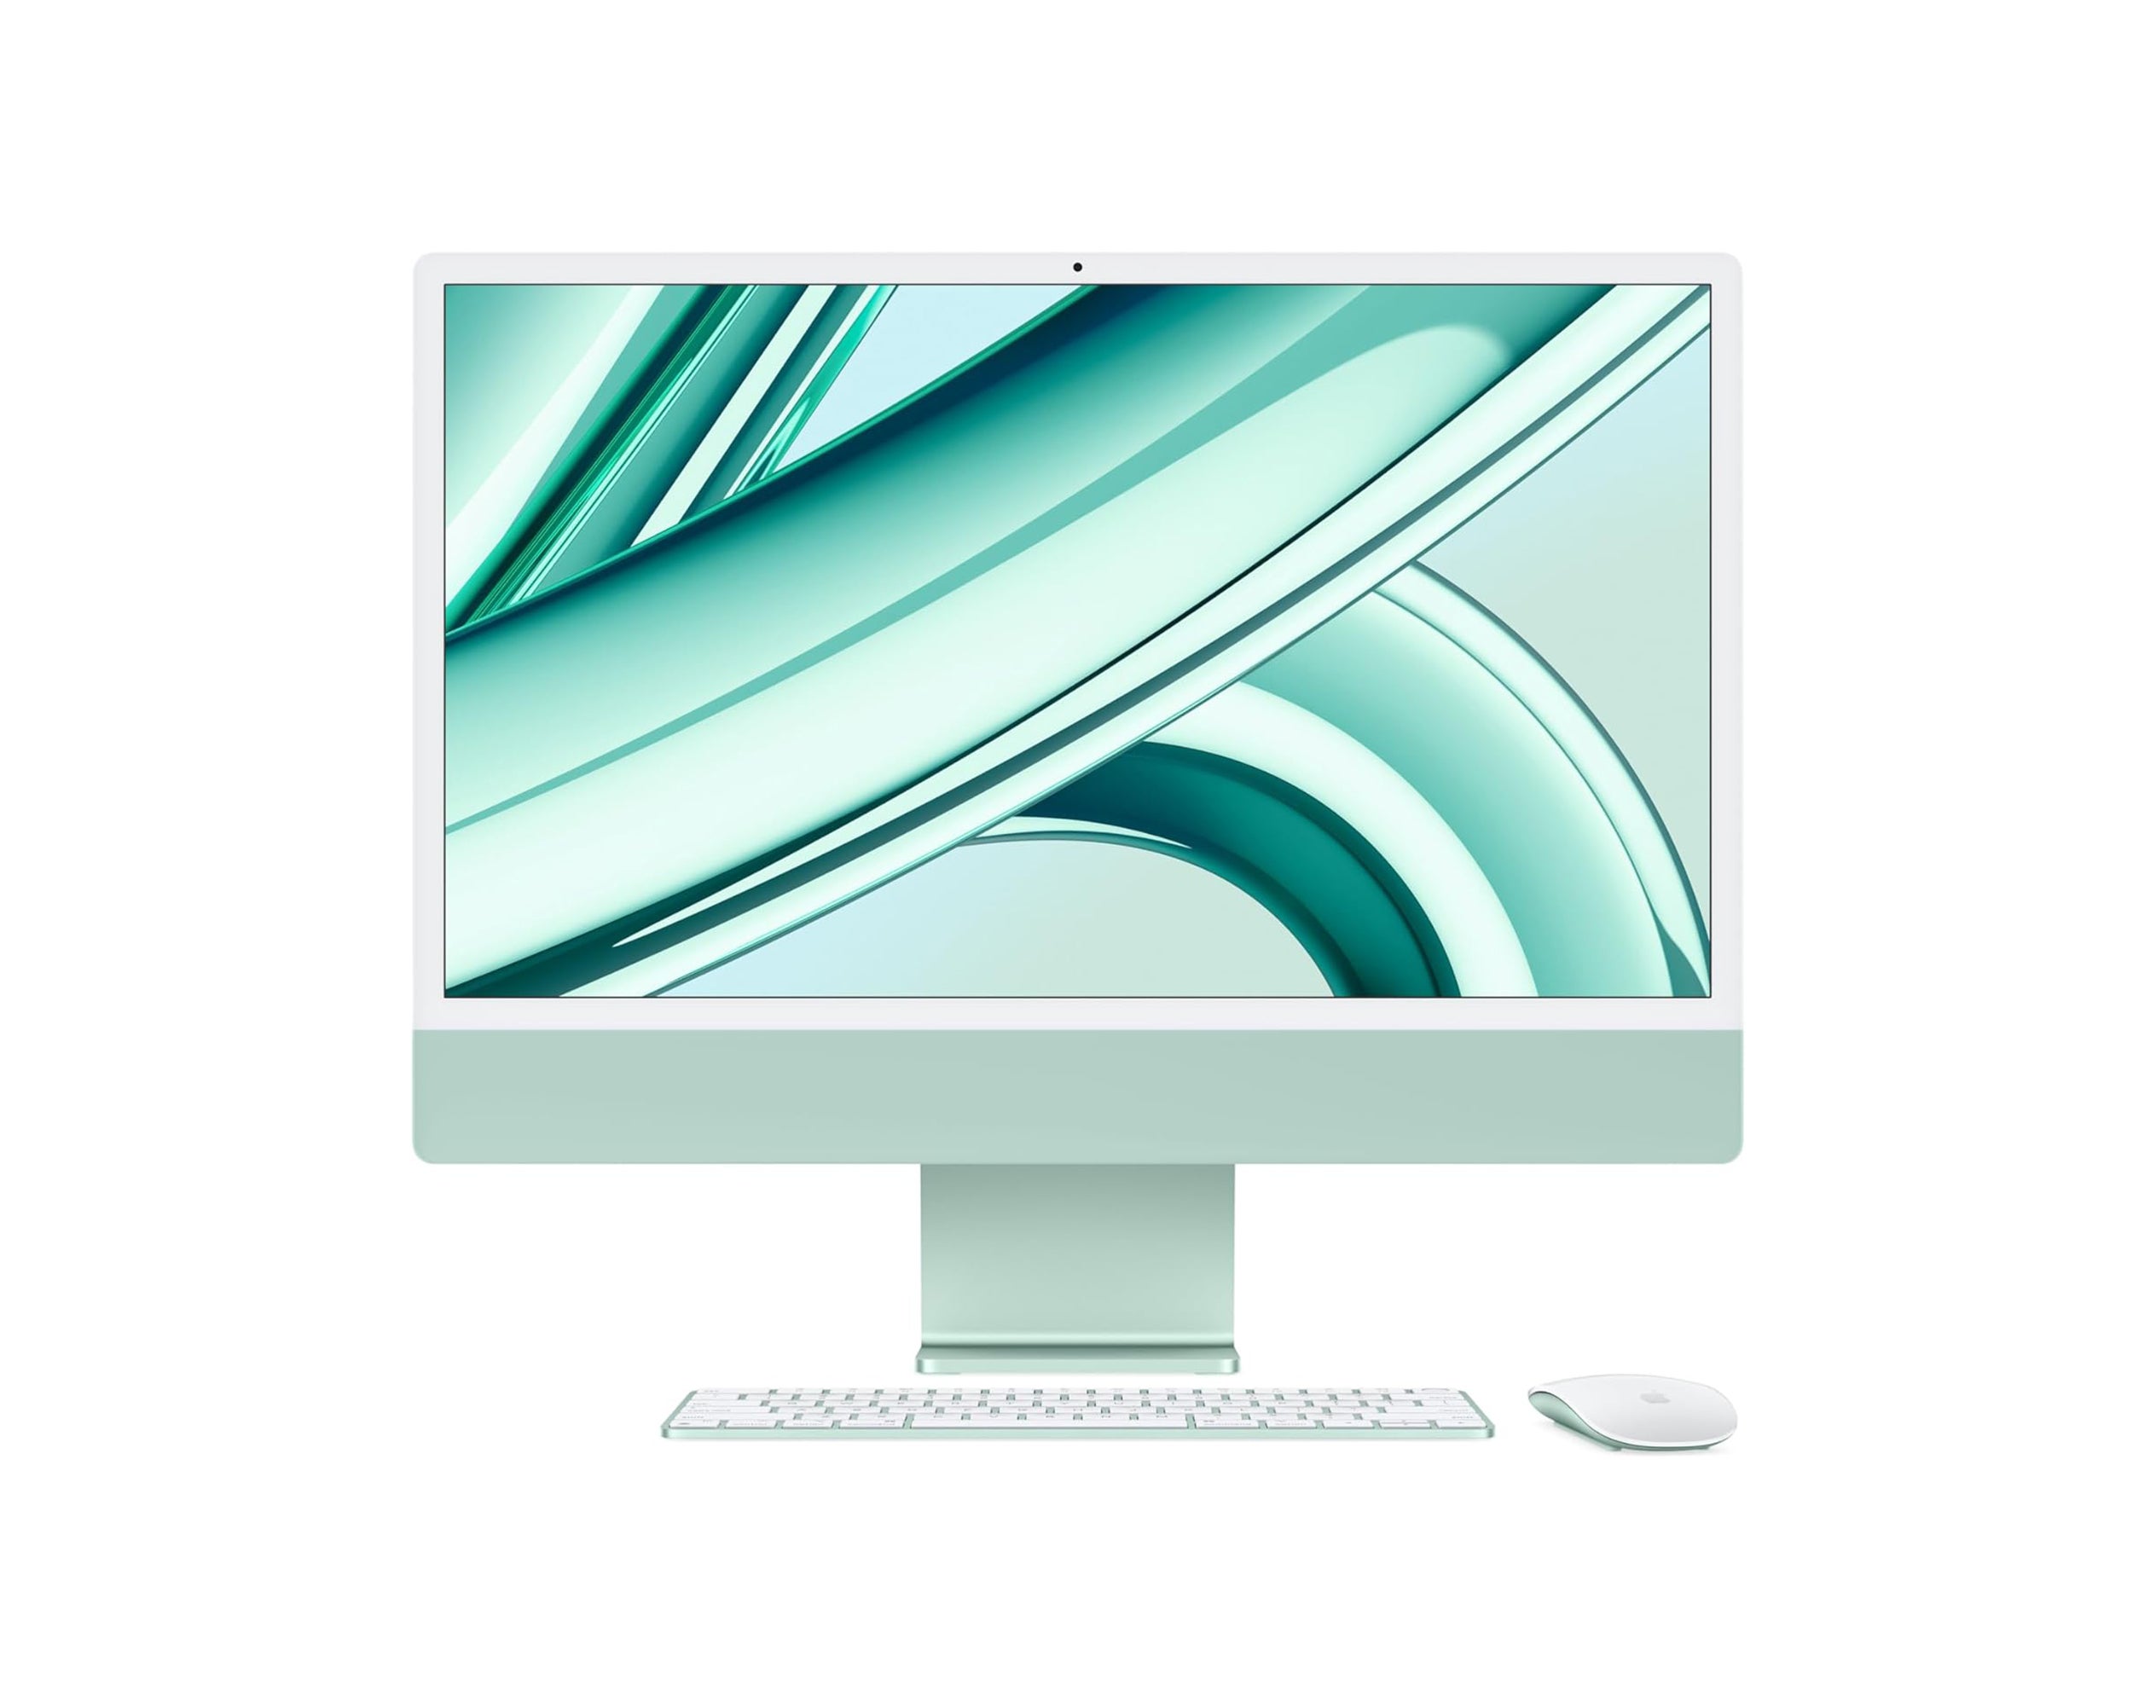 New M3 iMac could launch 2H 2023 - 9to5Mac